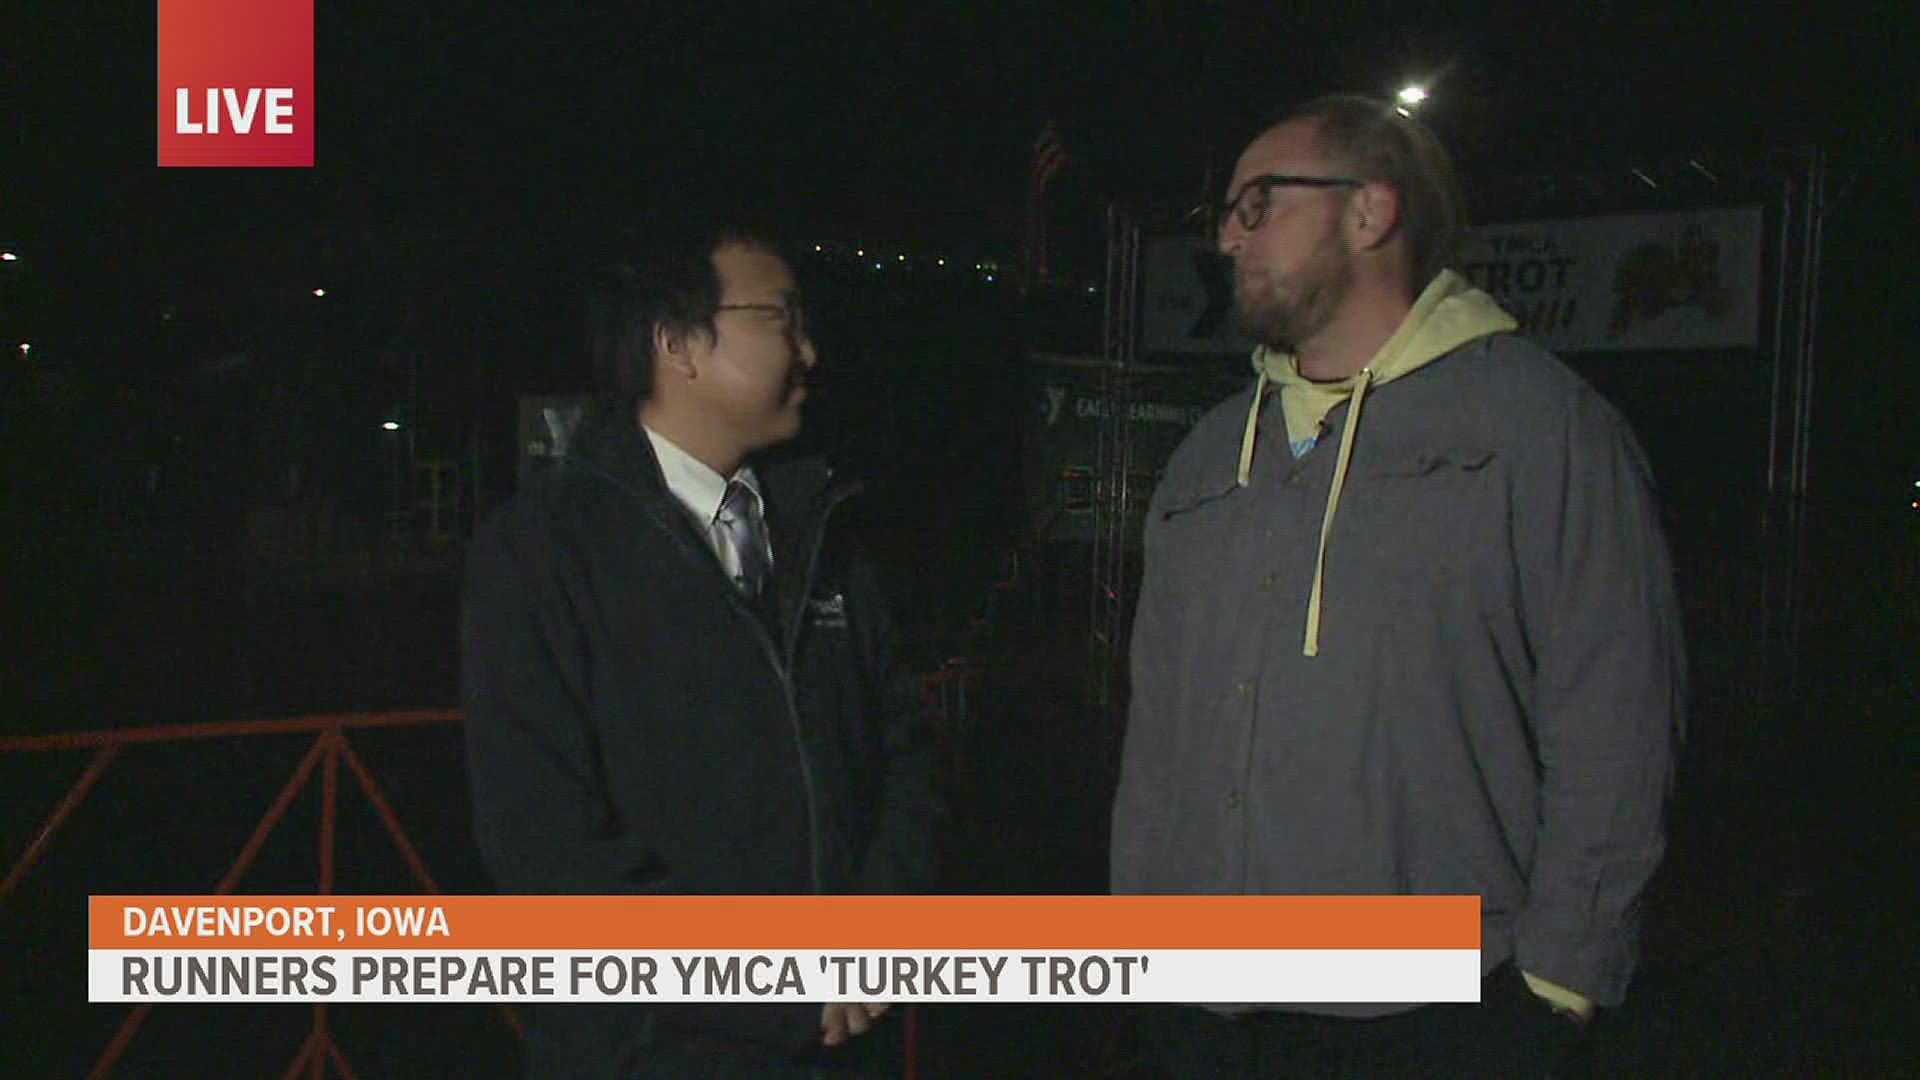 News 8's Jonathon Fong chatted with one of the race organizers about the annual charity run and the good it does on Good Morning Quad Cities.